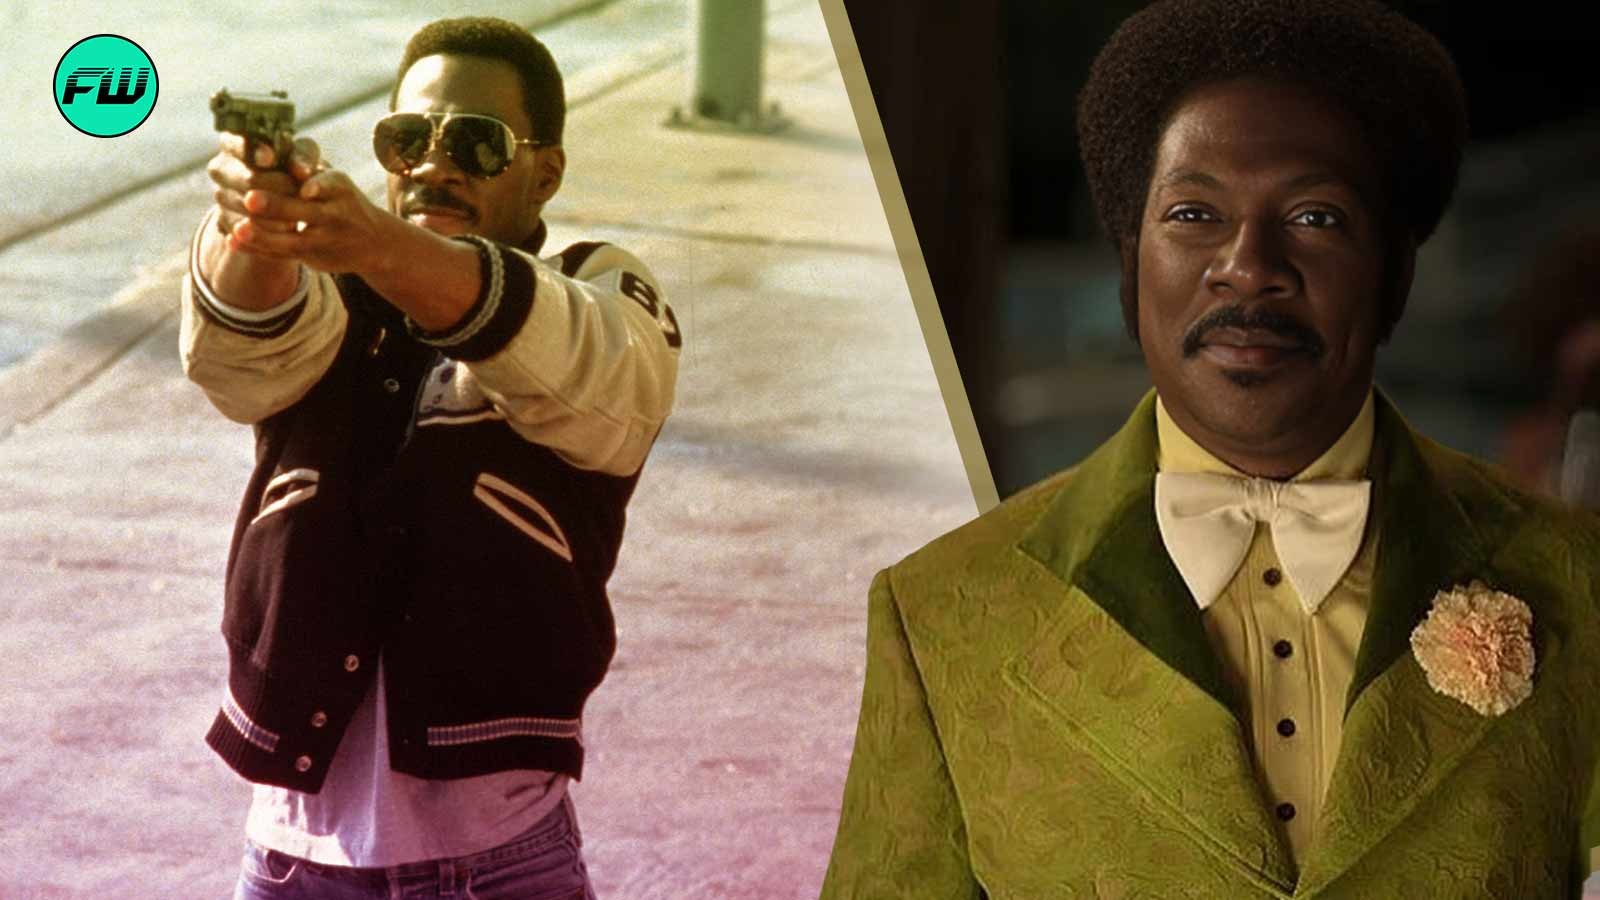 Eddie Murphy, worth 0 million, makes it clear: He worked as a shoe salesman before he became famous